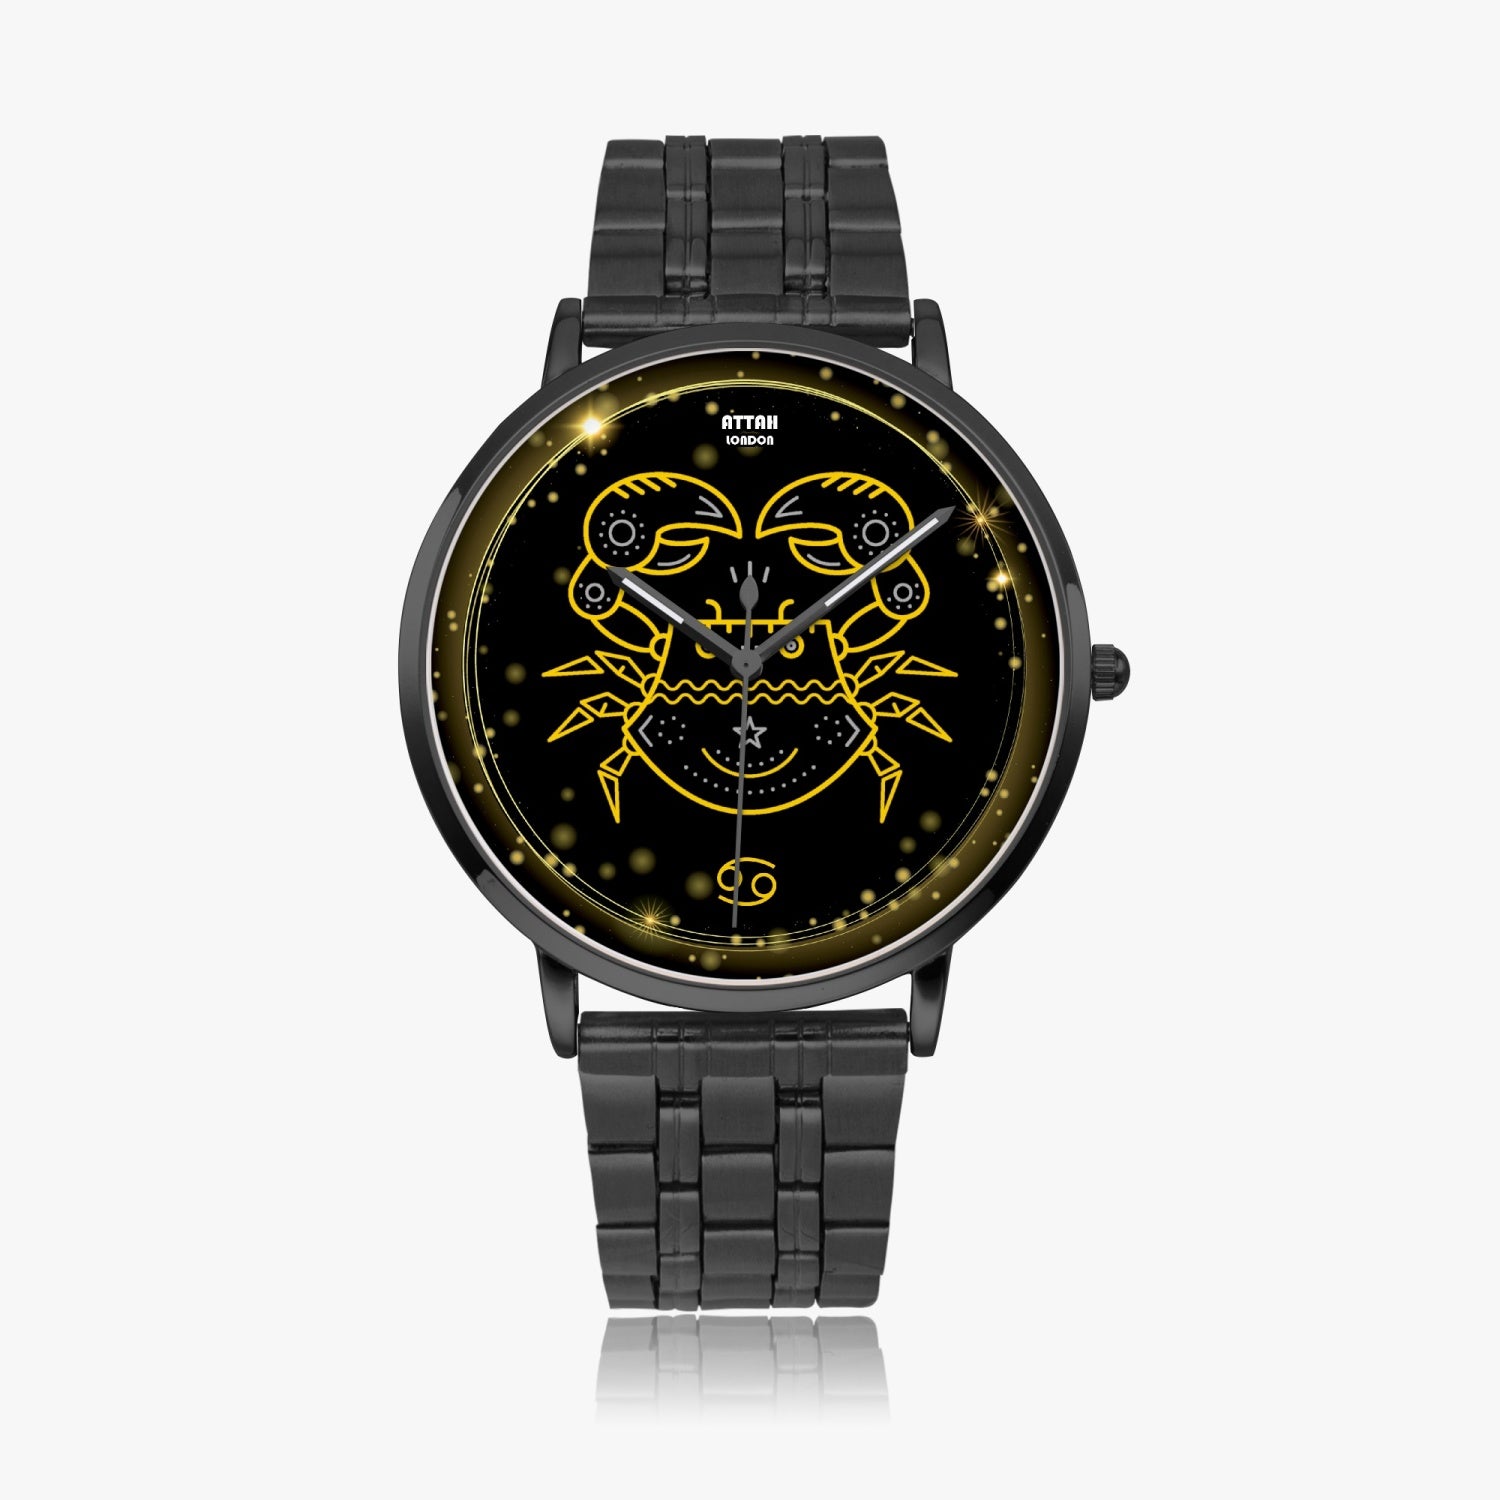 Cancer horoscope stainless steel women's watch